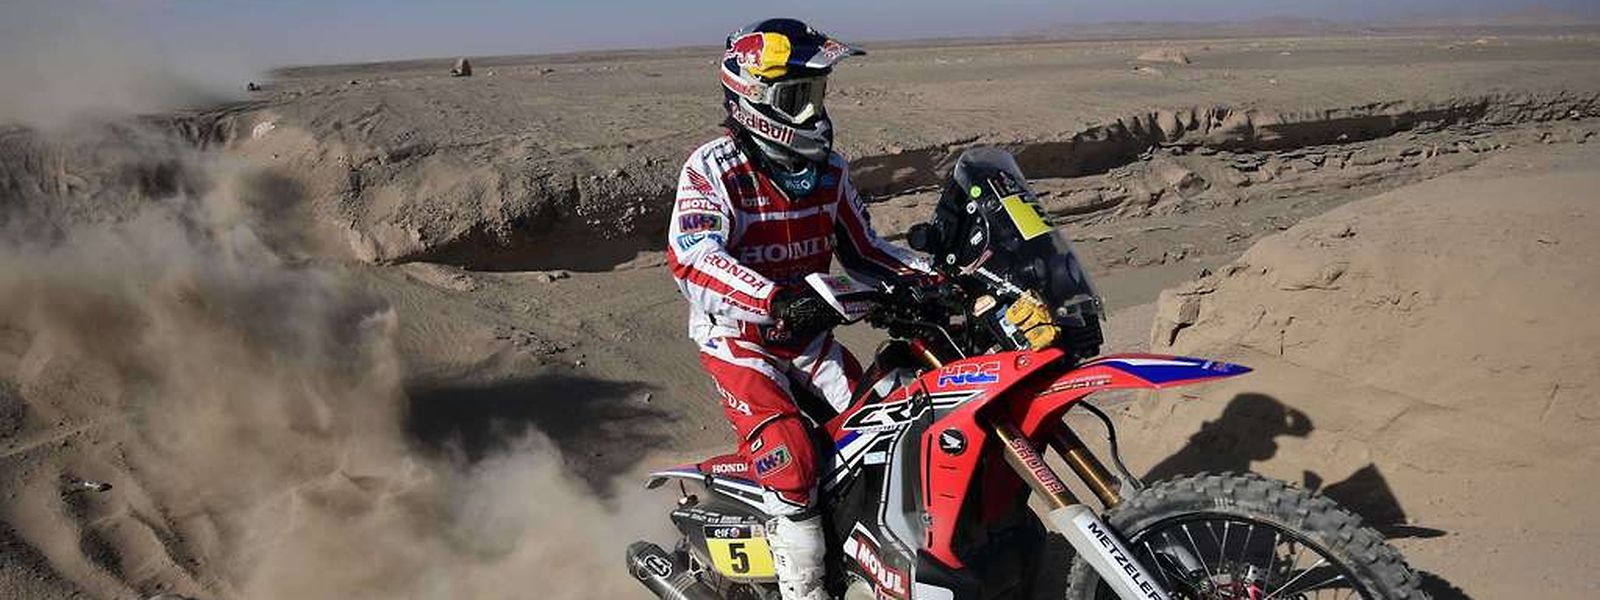 Honda's Portuguese biker Helder Rodrigues competes during the 2015 Dakar Rally stage 6 between Antofogasta and Iquique, Chile, on January 9, 2015.   AFP PHOTO / FRANCK FIFE